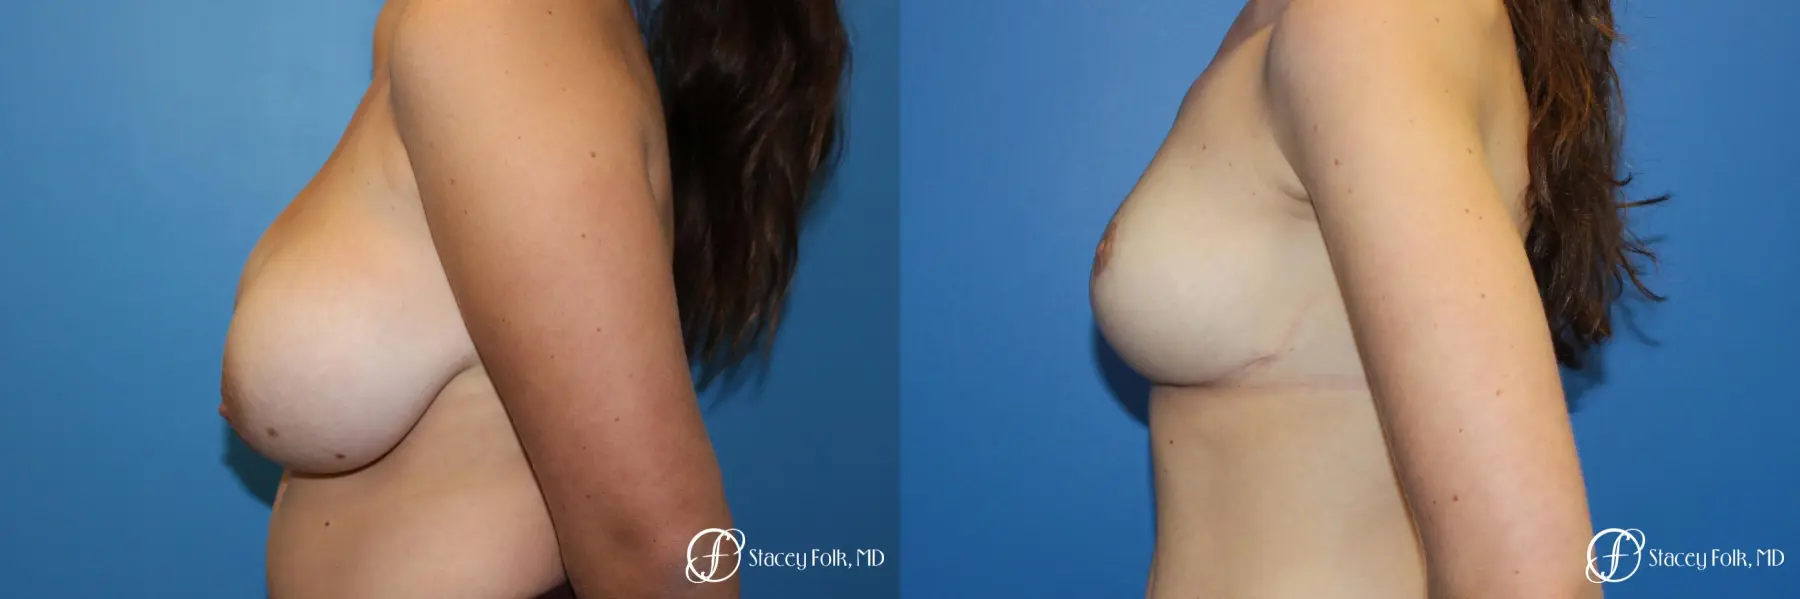 Denver Breast Lift - Mastopexy 10021 - Before and After 3